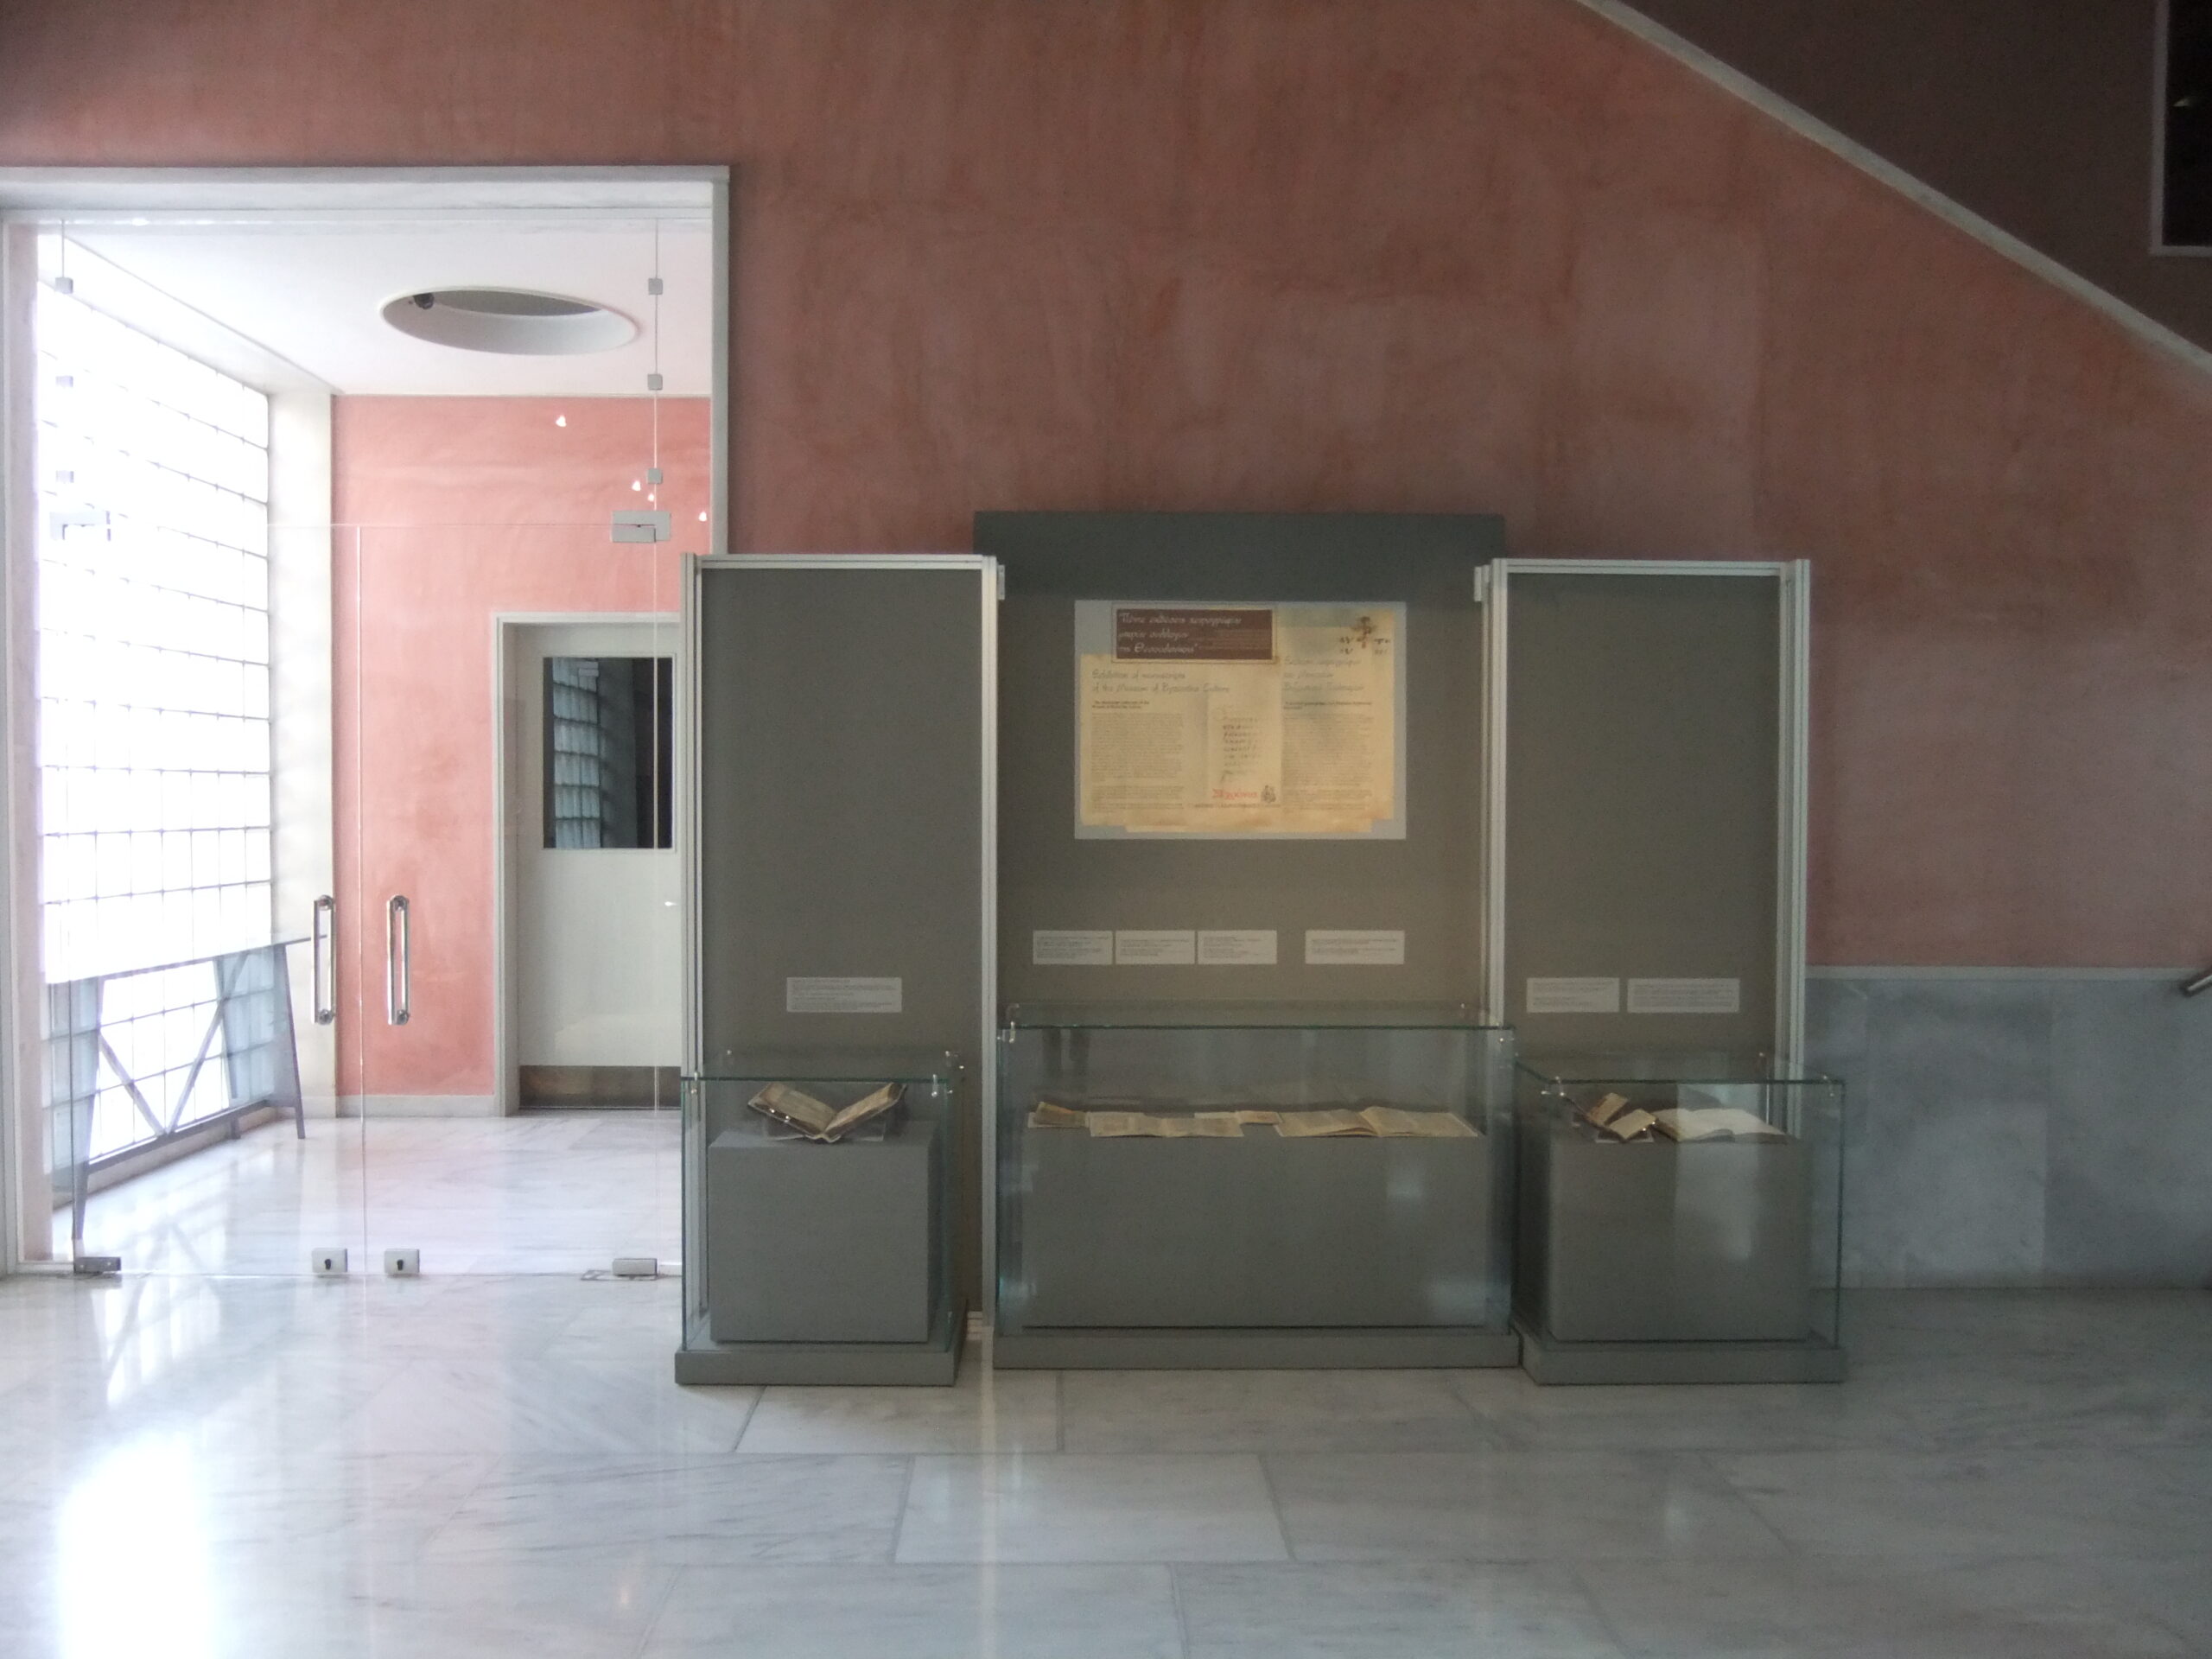 Five exhibitions of manuscripts from small collections in Thessaloniki